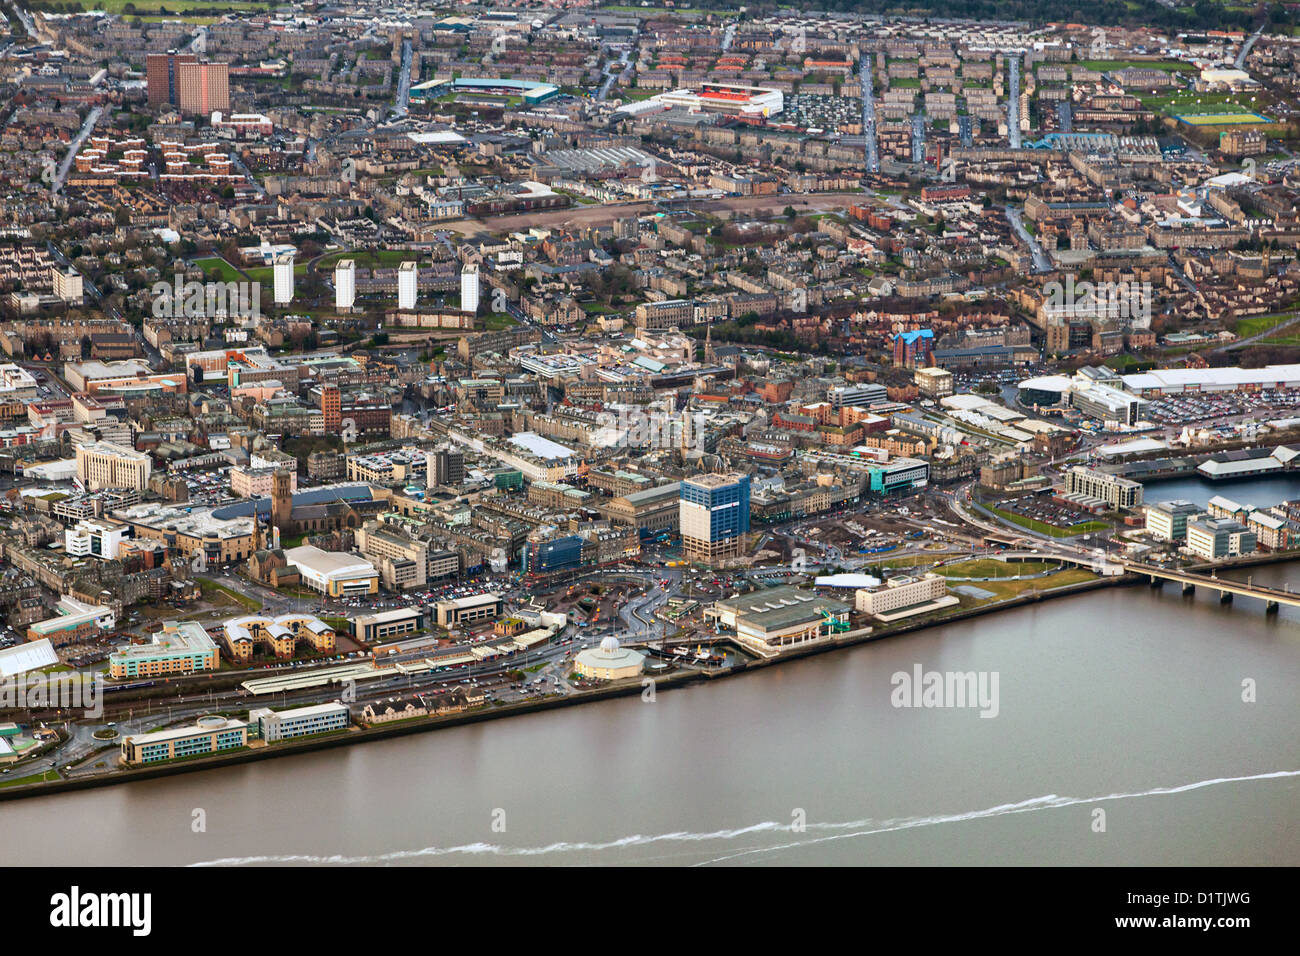 Aerial view of Dundee, the River Tay and the Road/Rail Bridge(s) Stock Photo